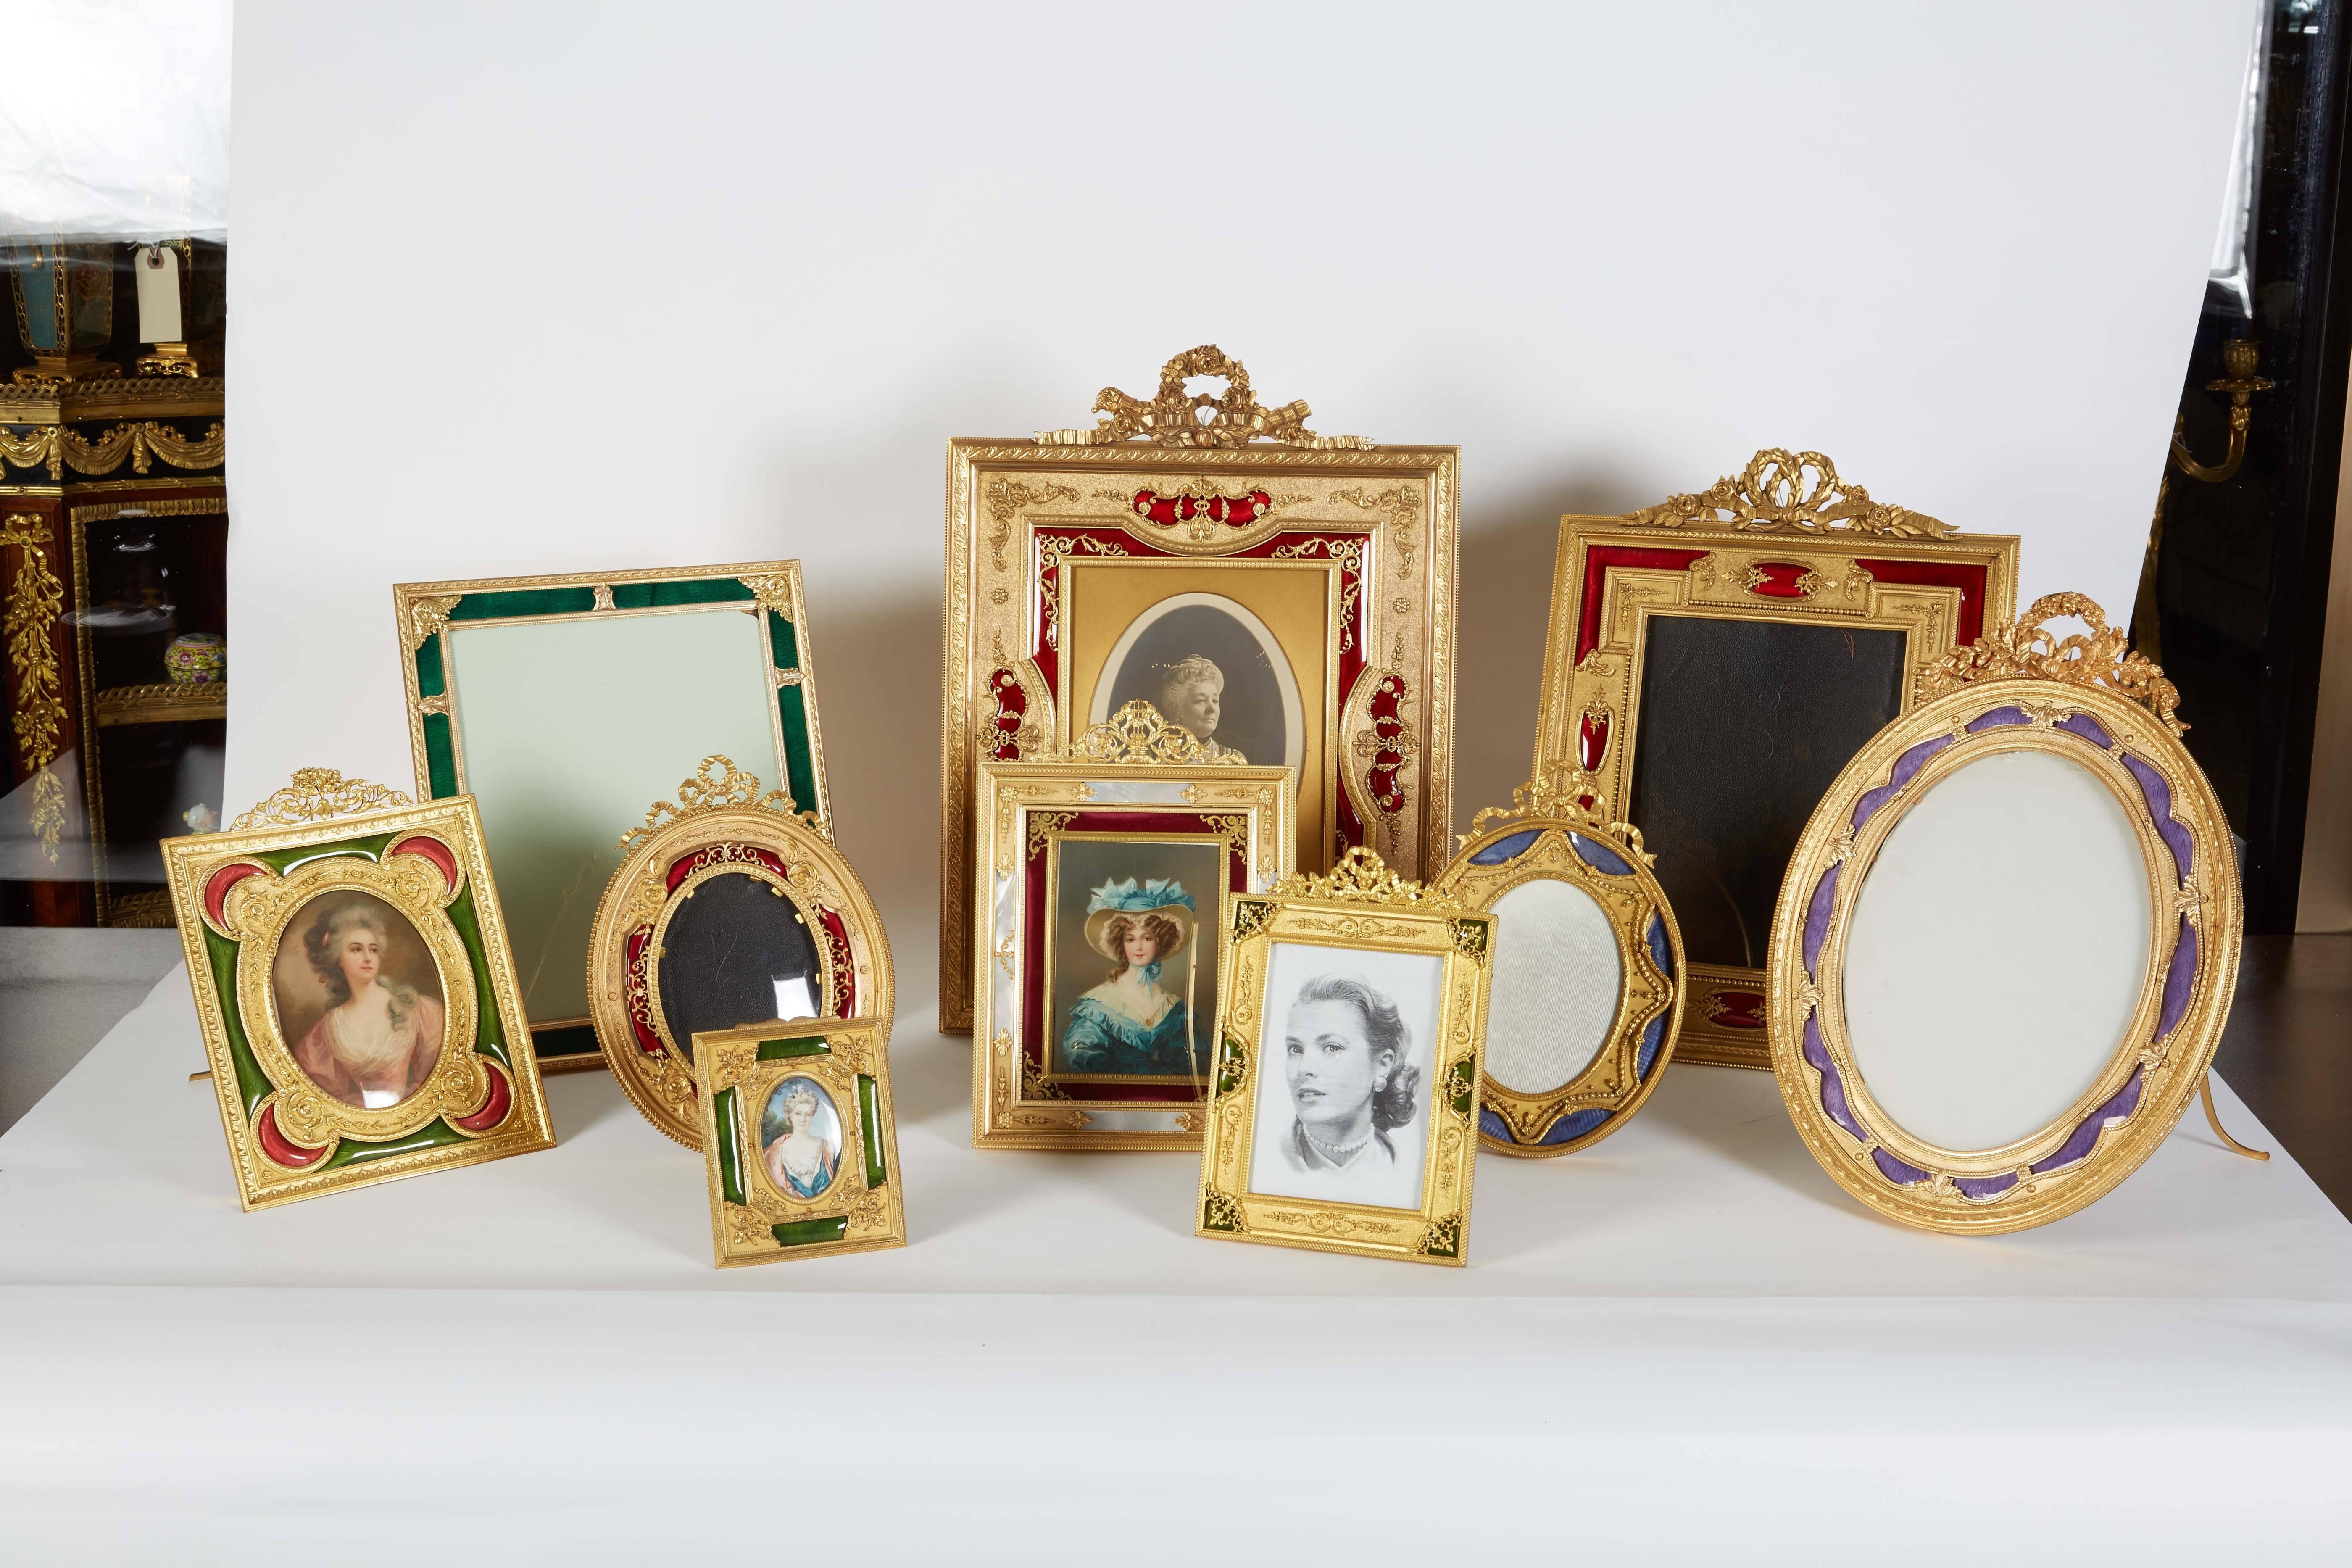 A large French gilt bronze ormolu and red guilloche enamel picture photo frame, 19th century.

Frame size: 18 x 13 inches.
Photo size: 9 x 8 inches.

